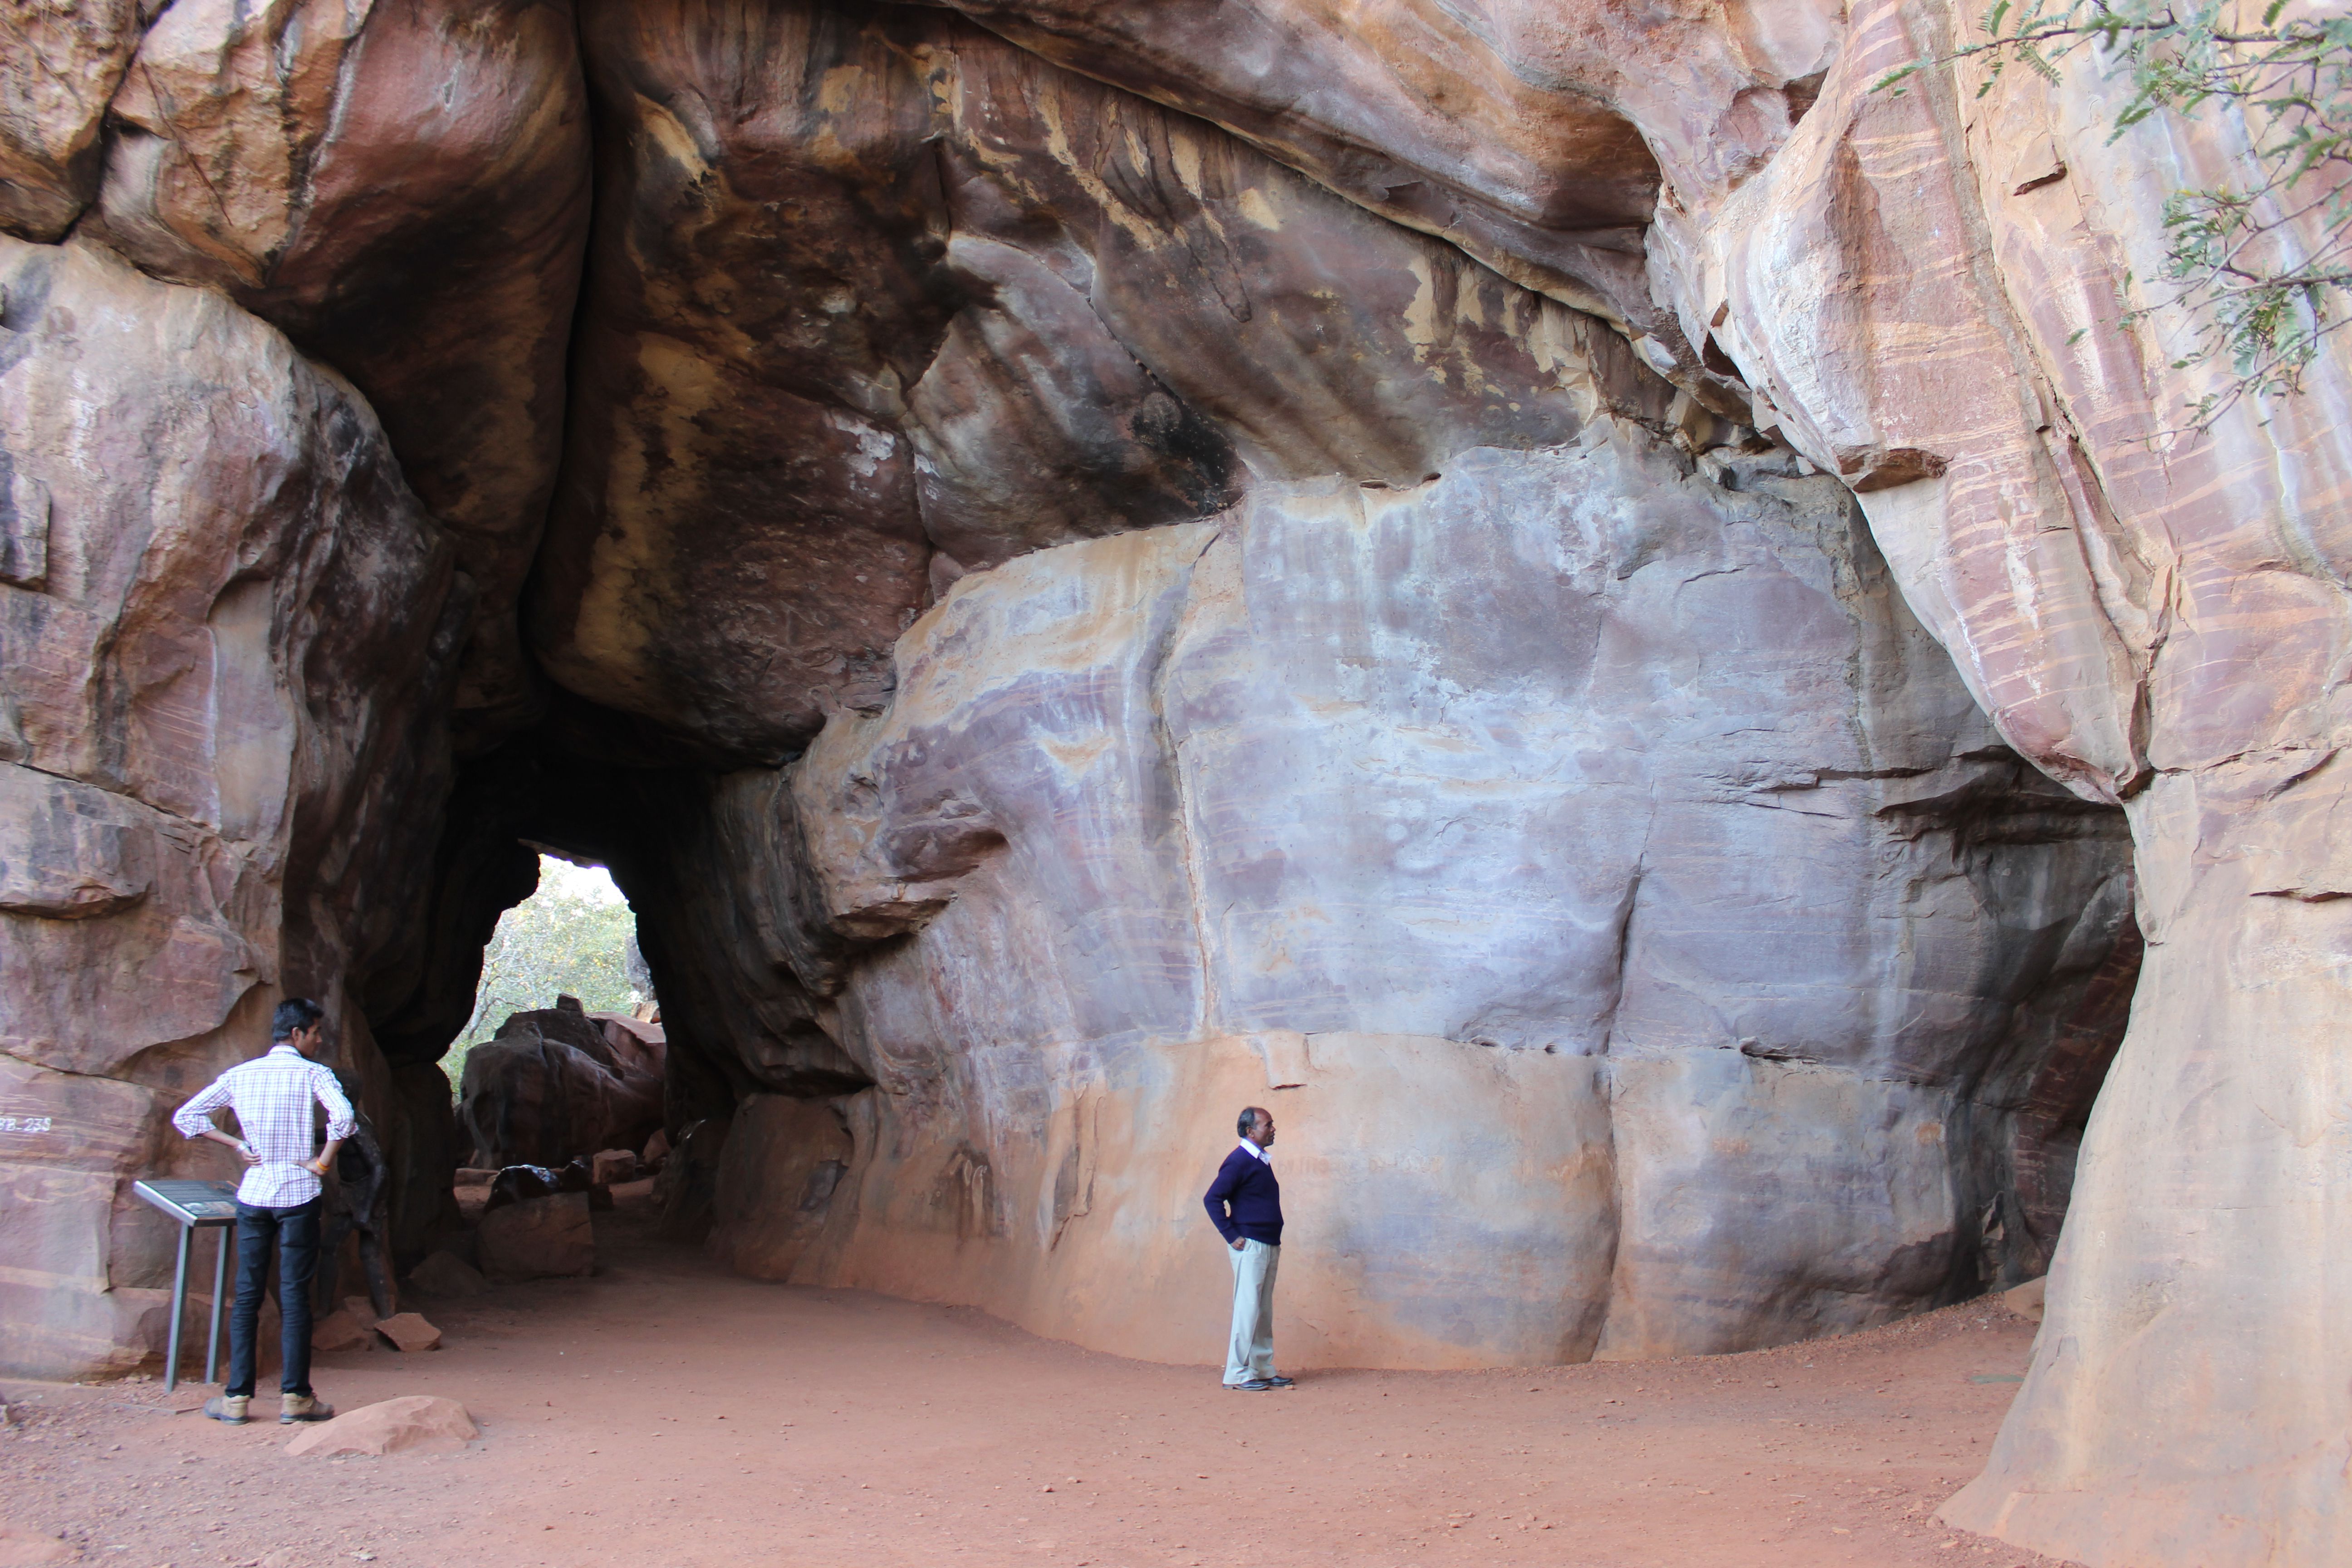 Two people stand near entrances to rock caves that loom over them